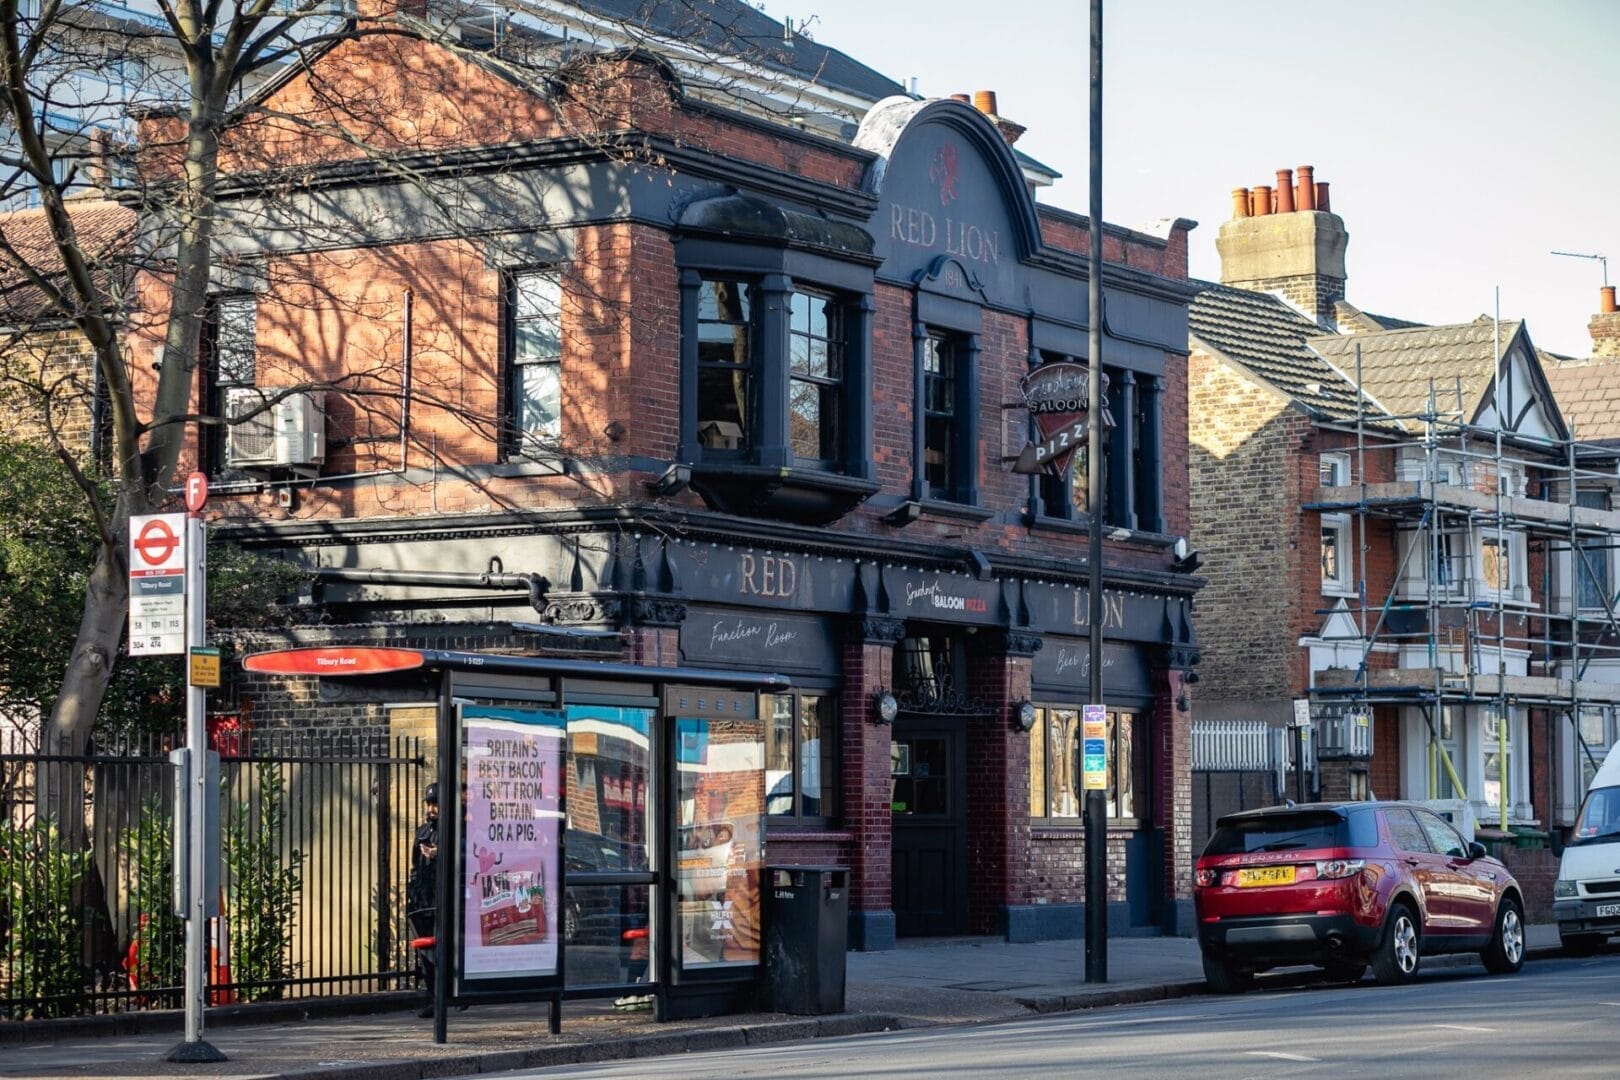 Let A Pub In East Ham – Run The Red Lion !